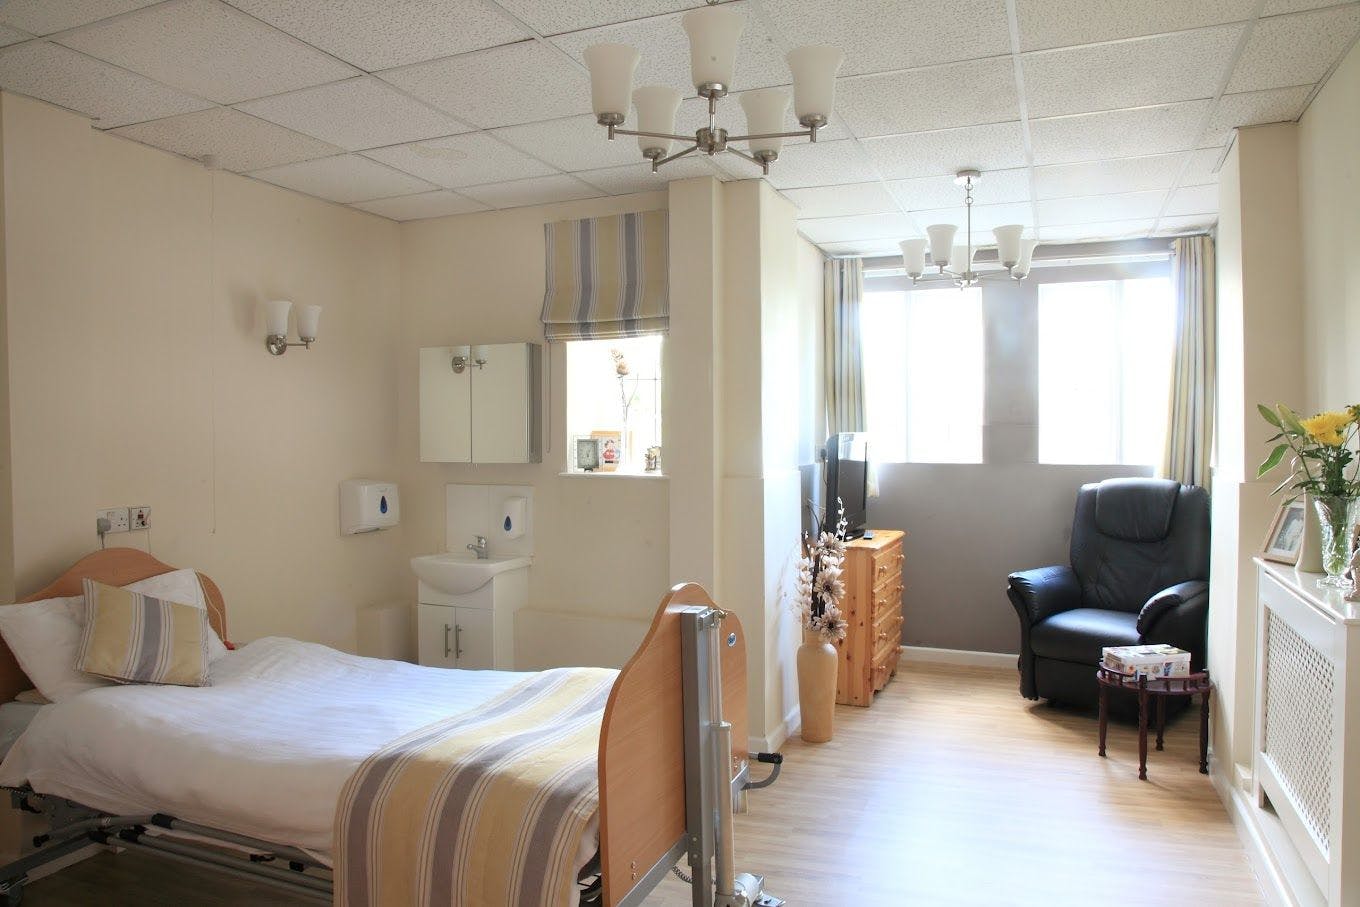 Astley Hall Care Home in Stourport-on-Severn